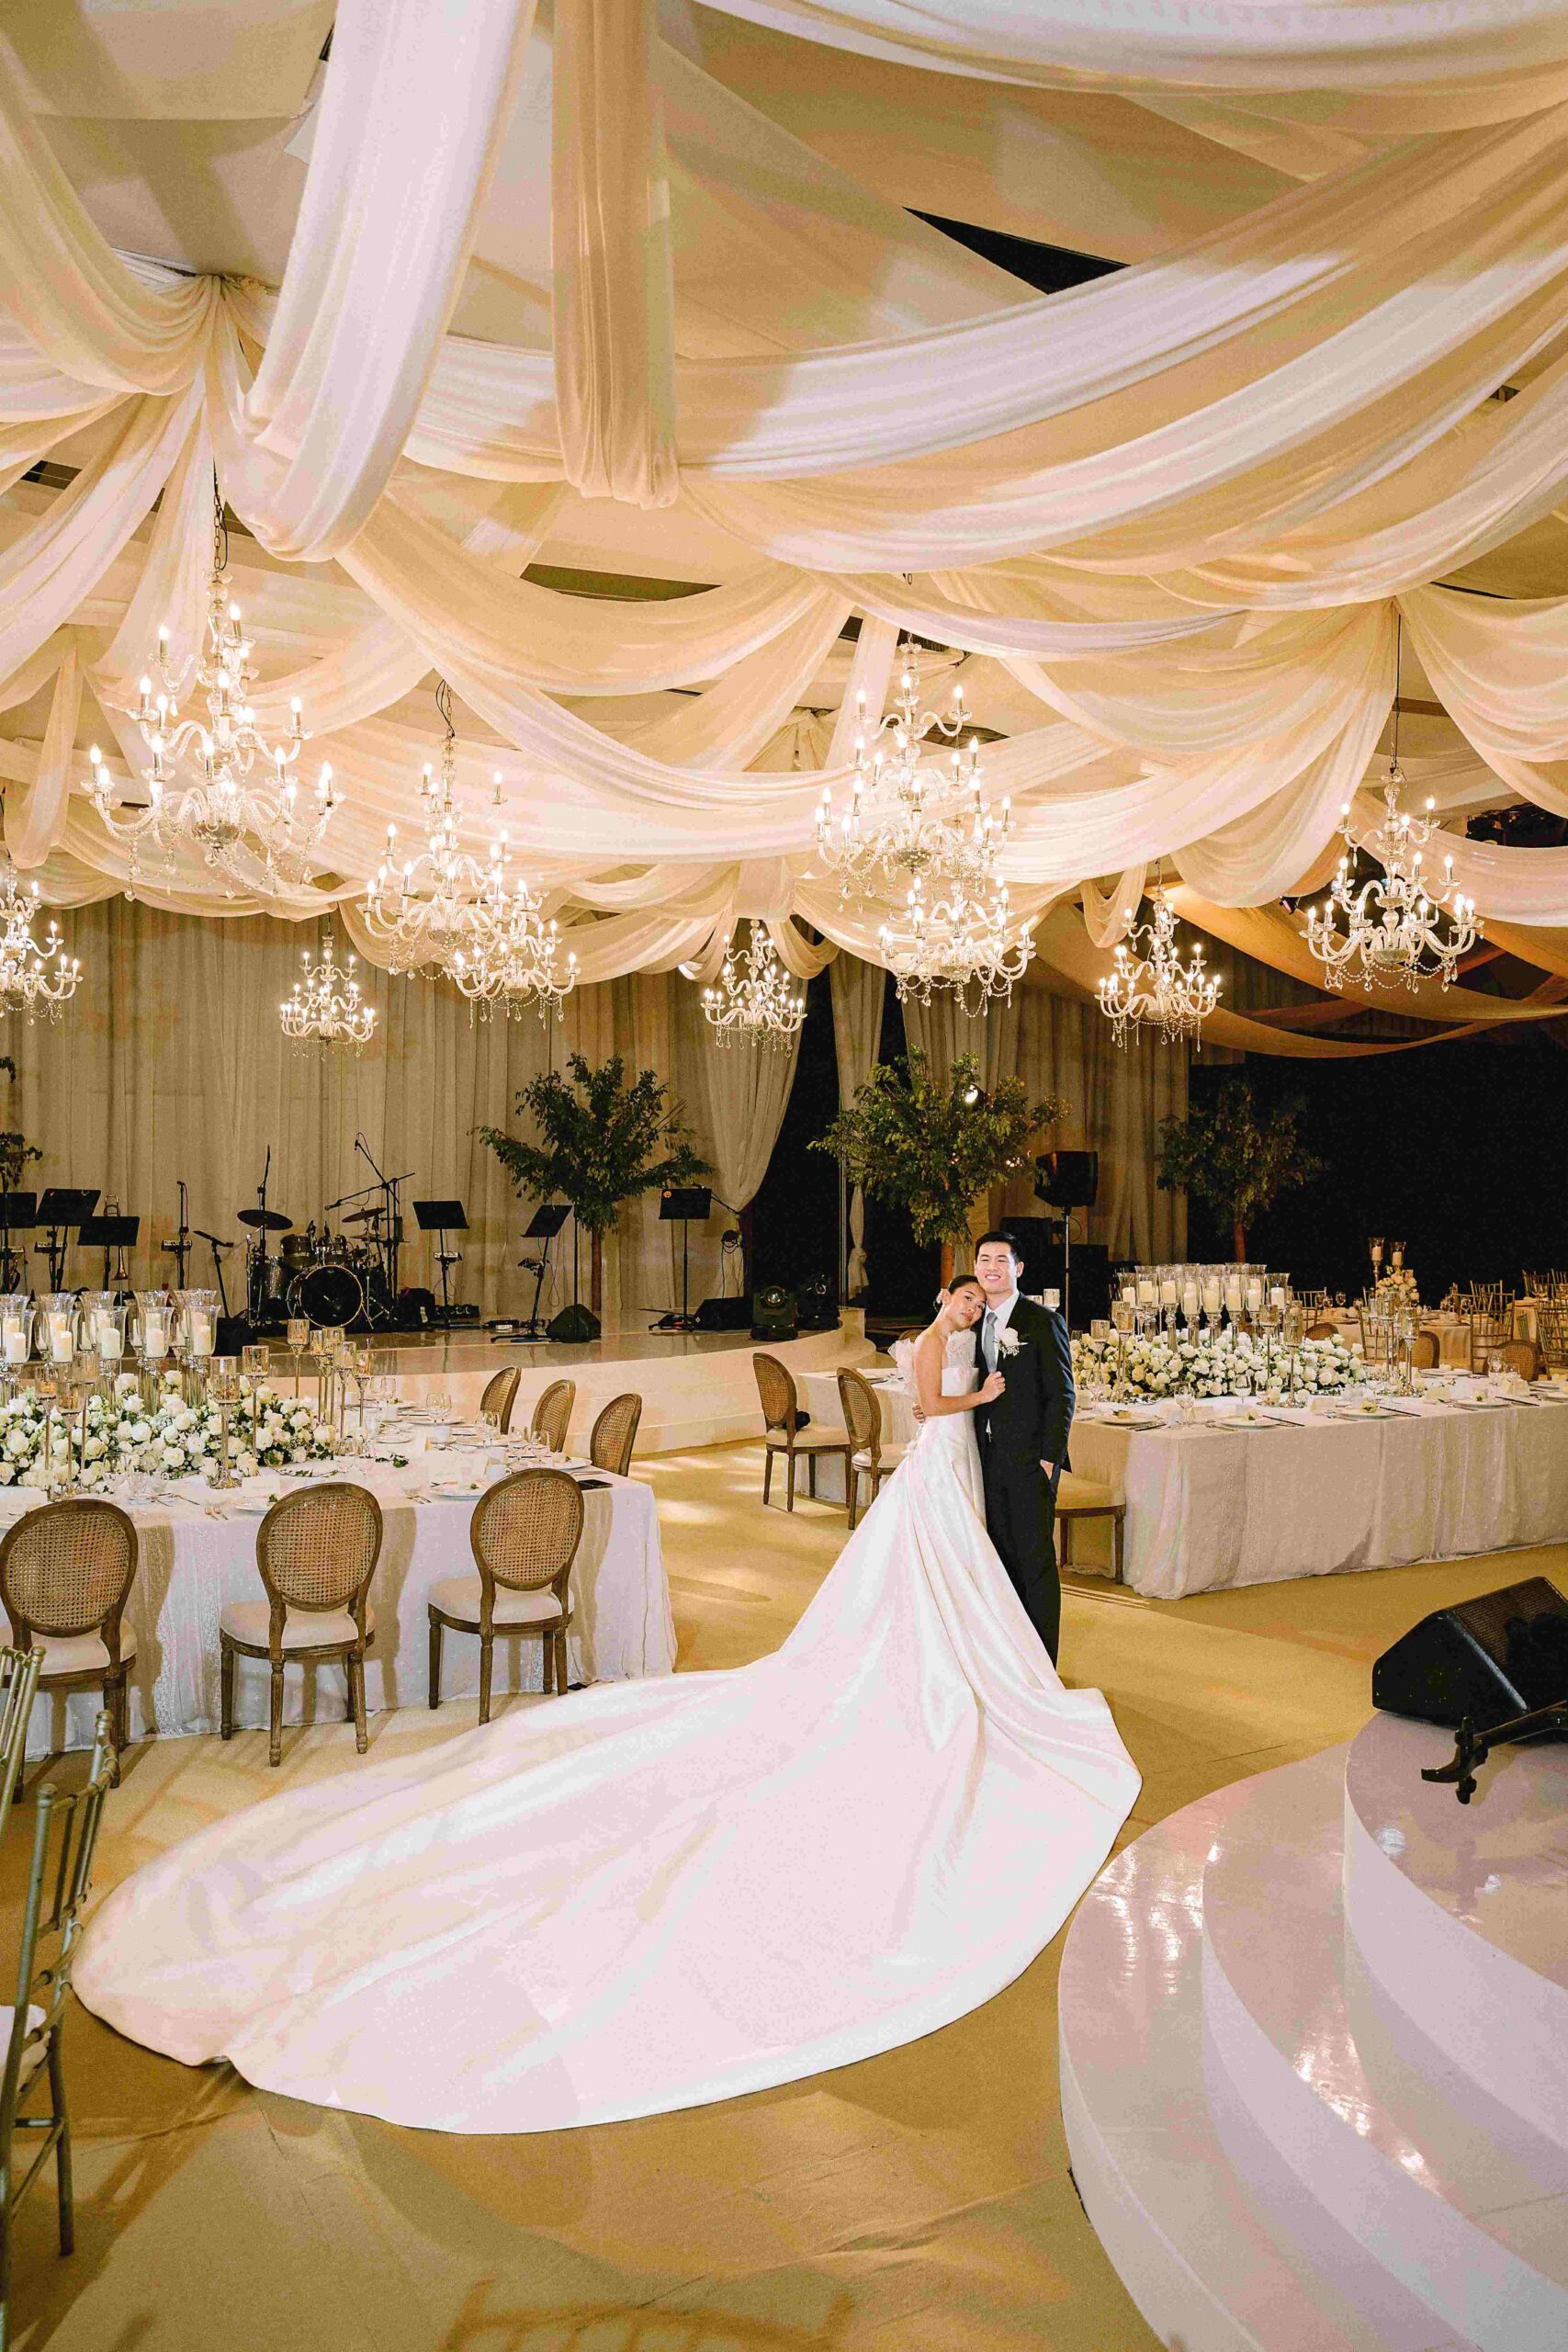 Richard Go and Ariana Coronel at their reception venue